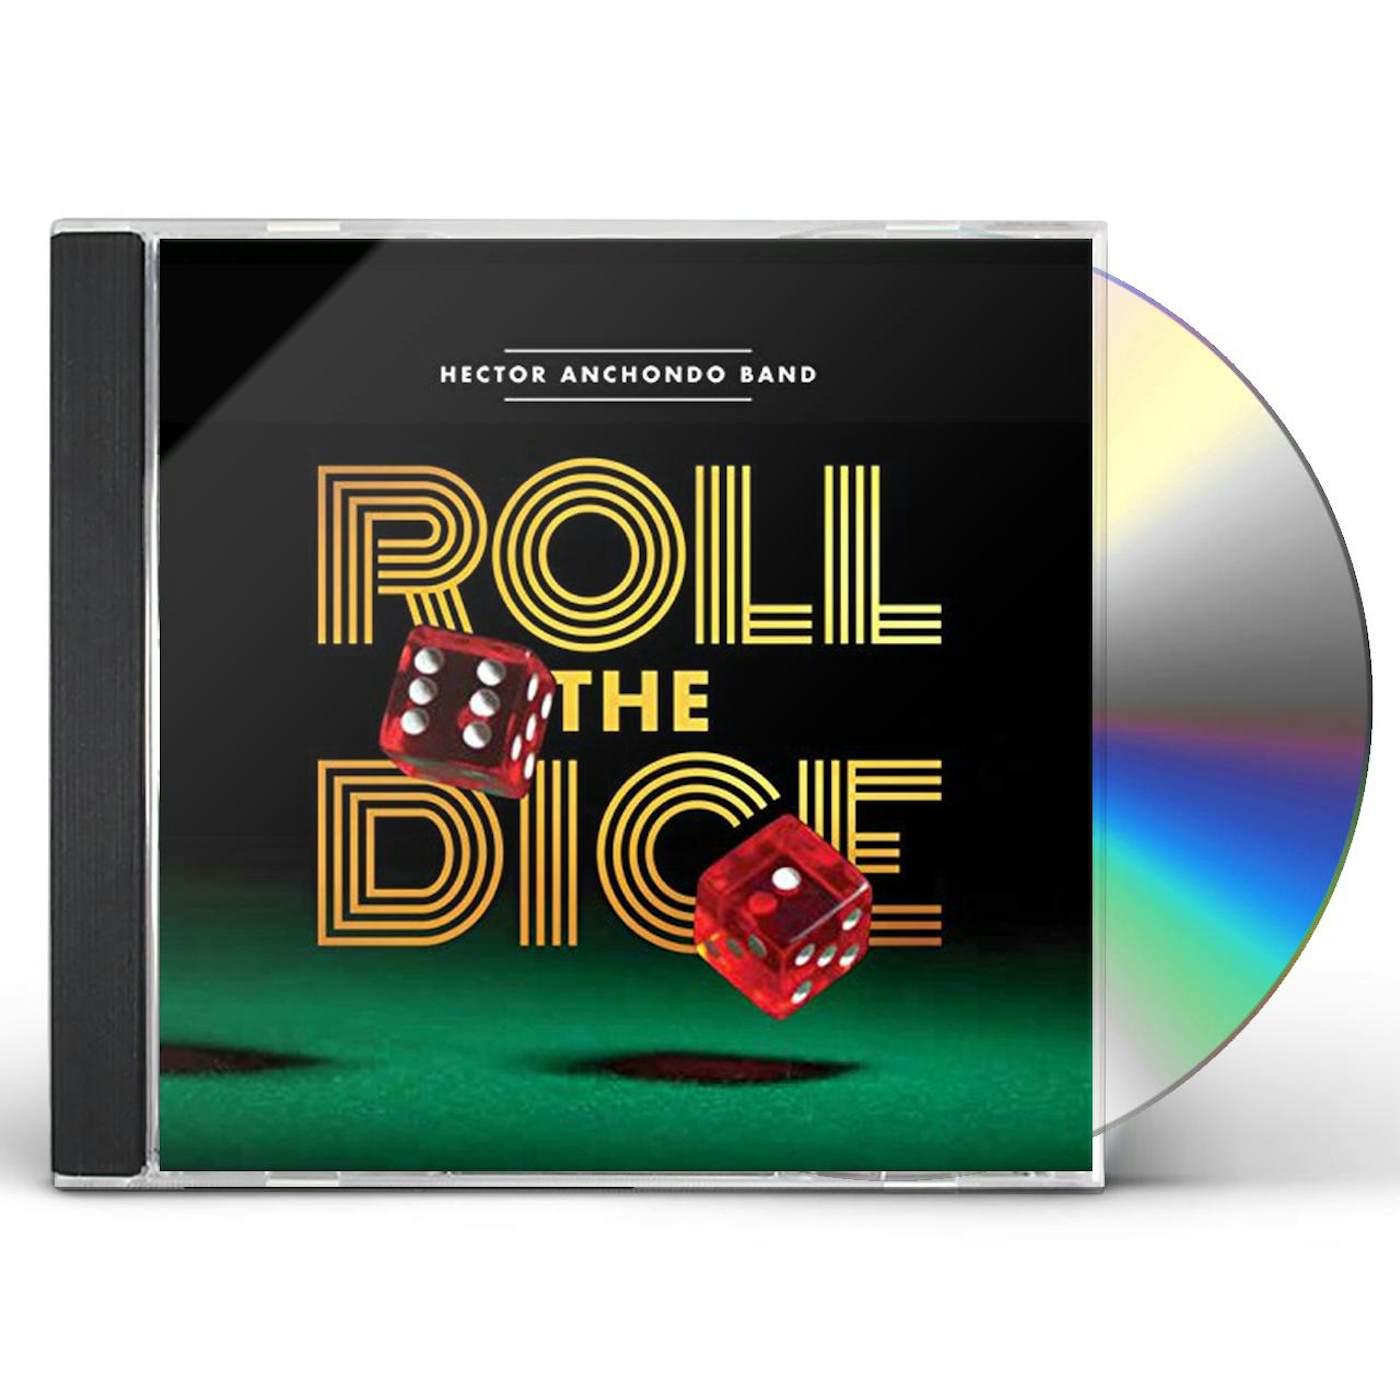 The Roll The Dice Band